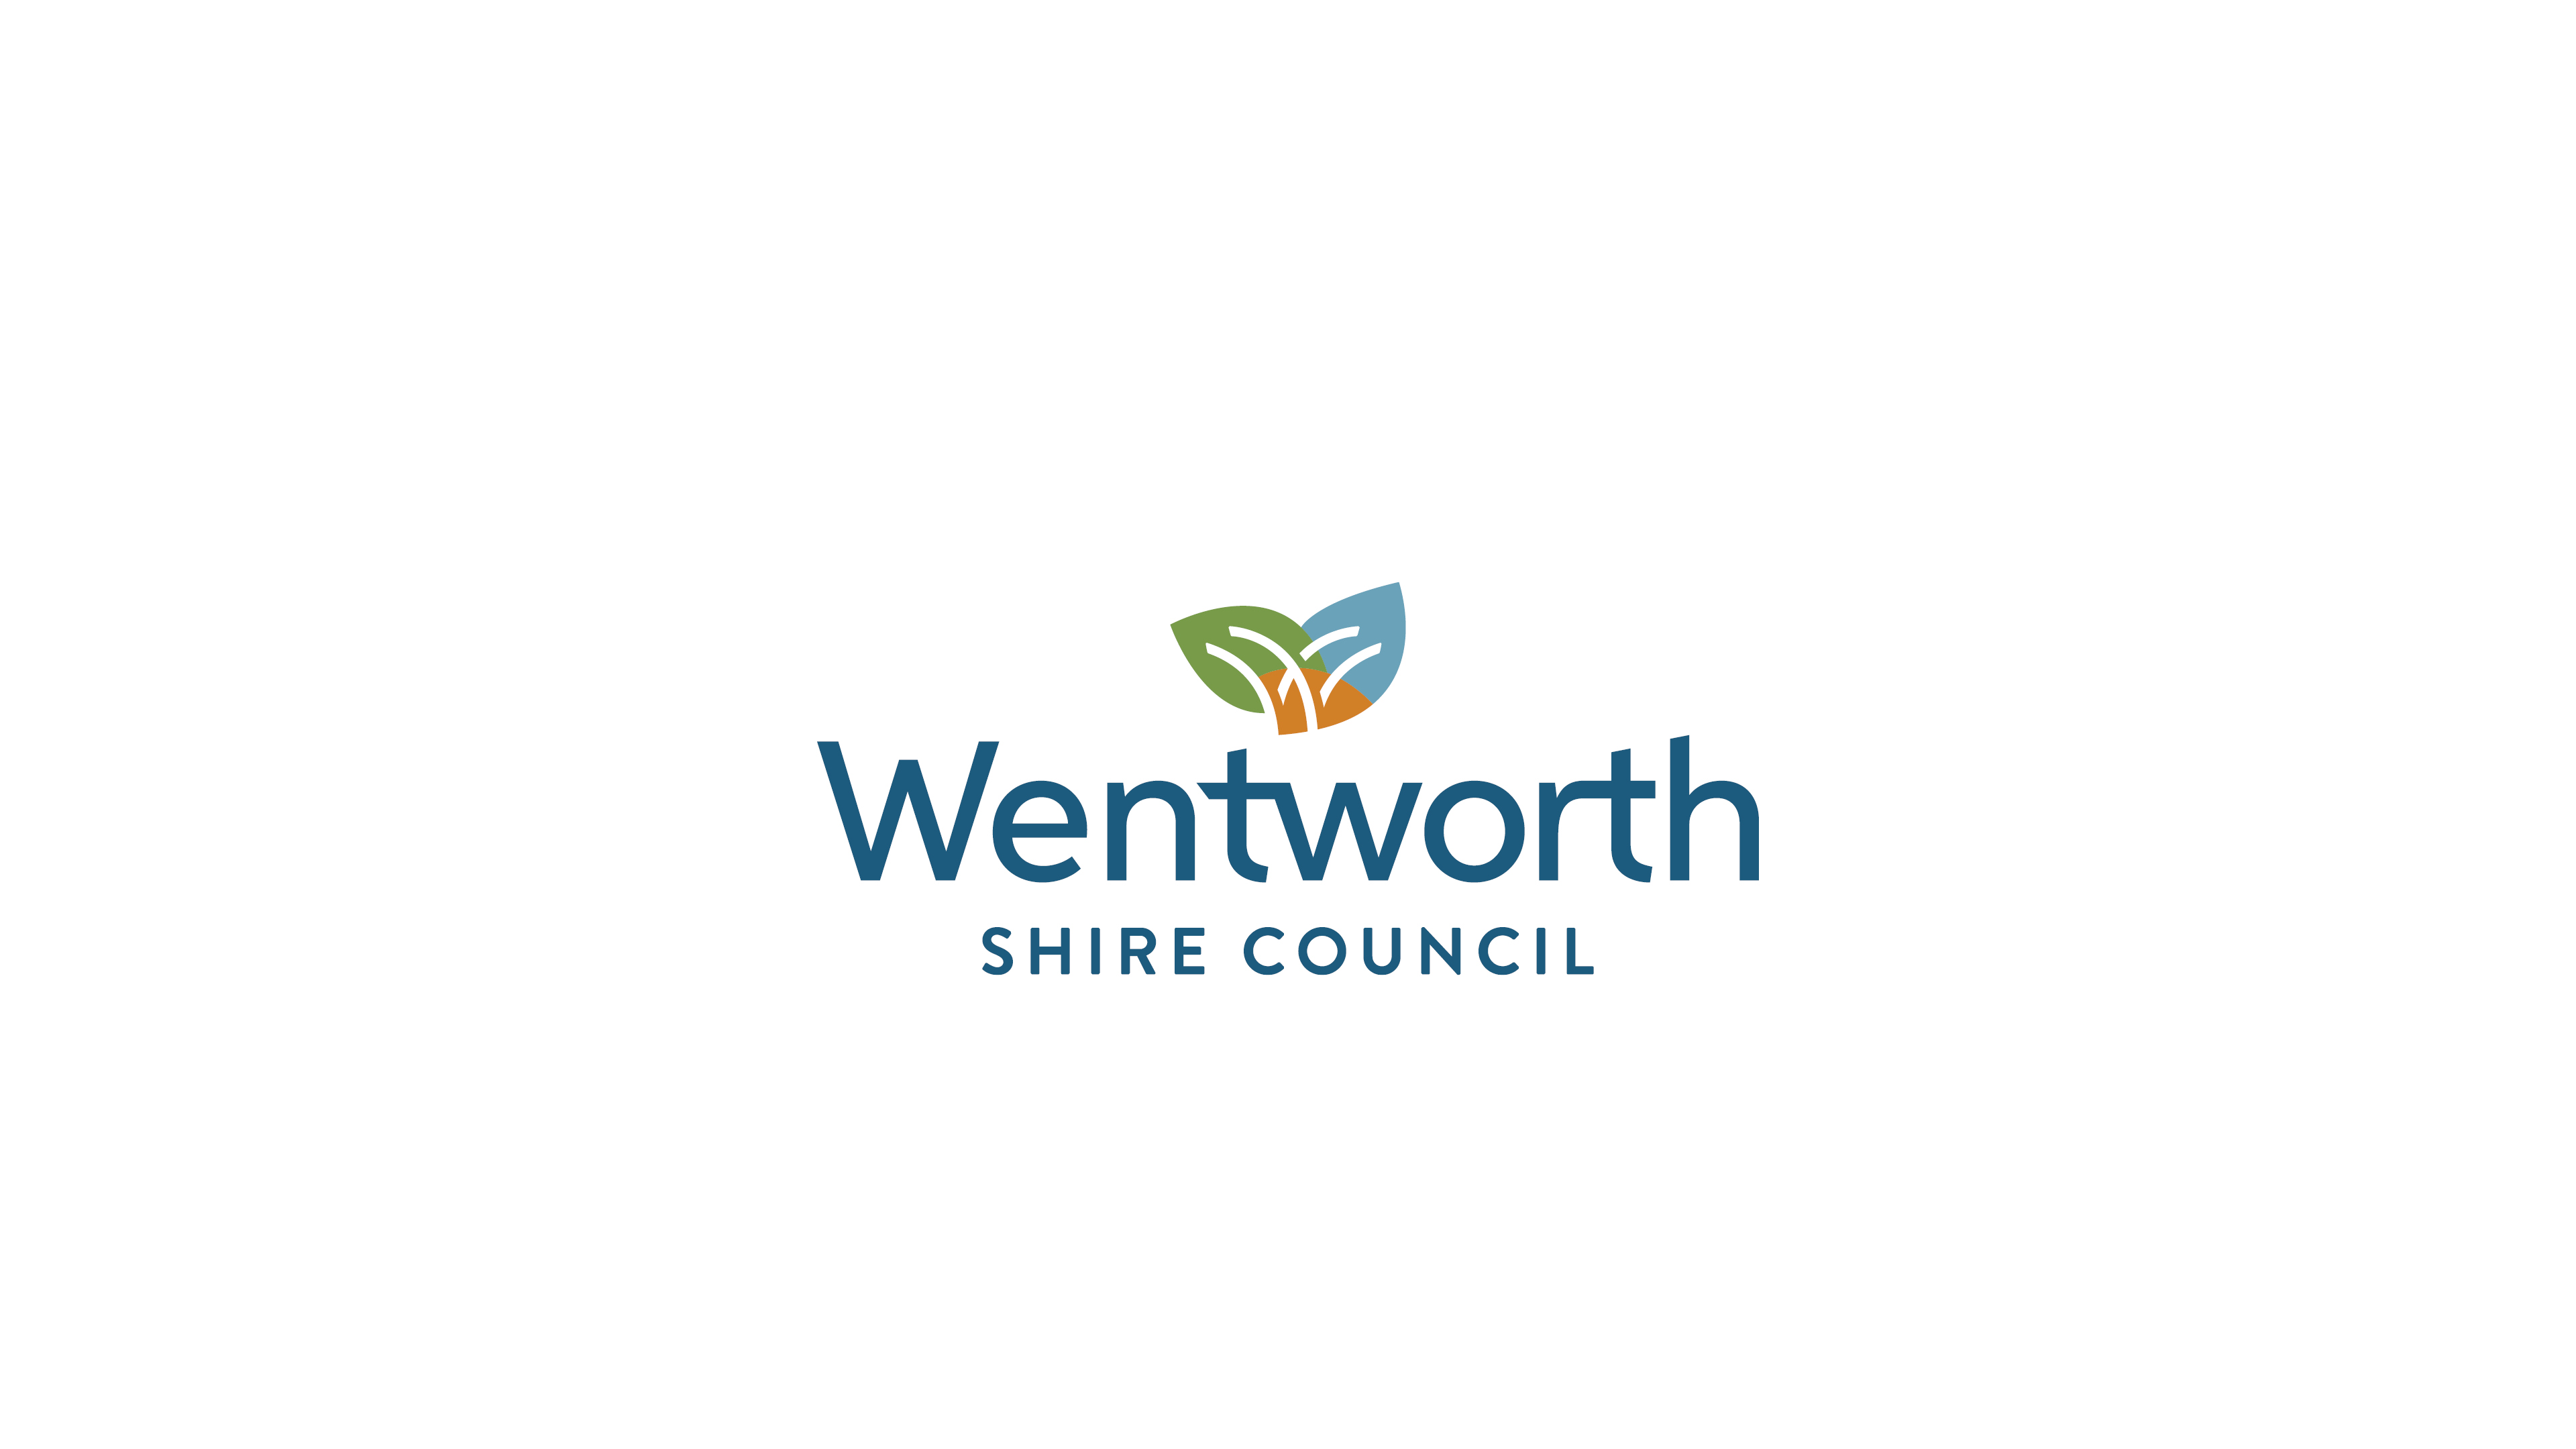 Wentworth Shire Council Logo and Branding Design - Saunders Design Group